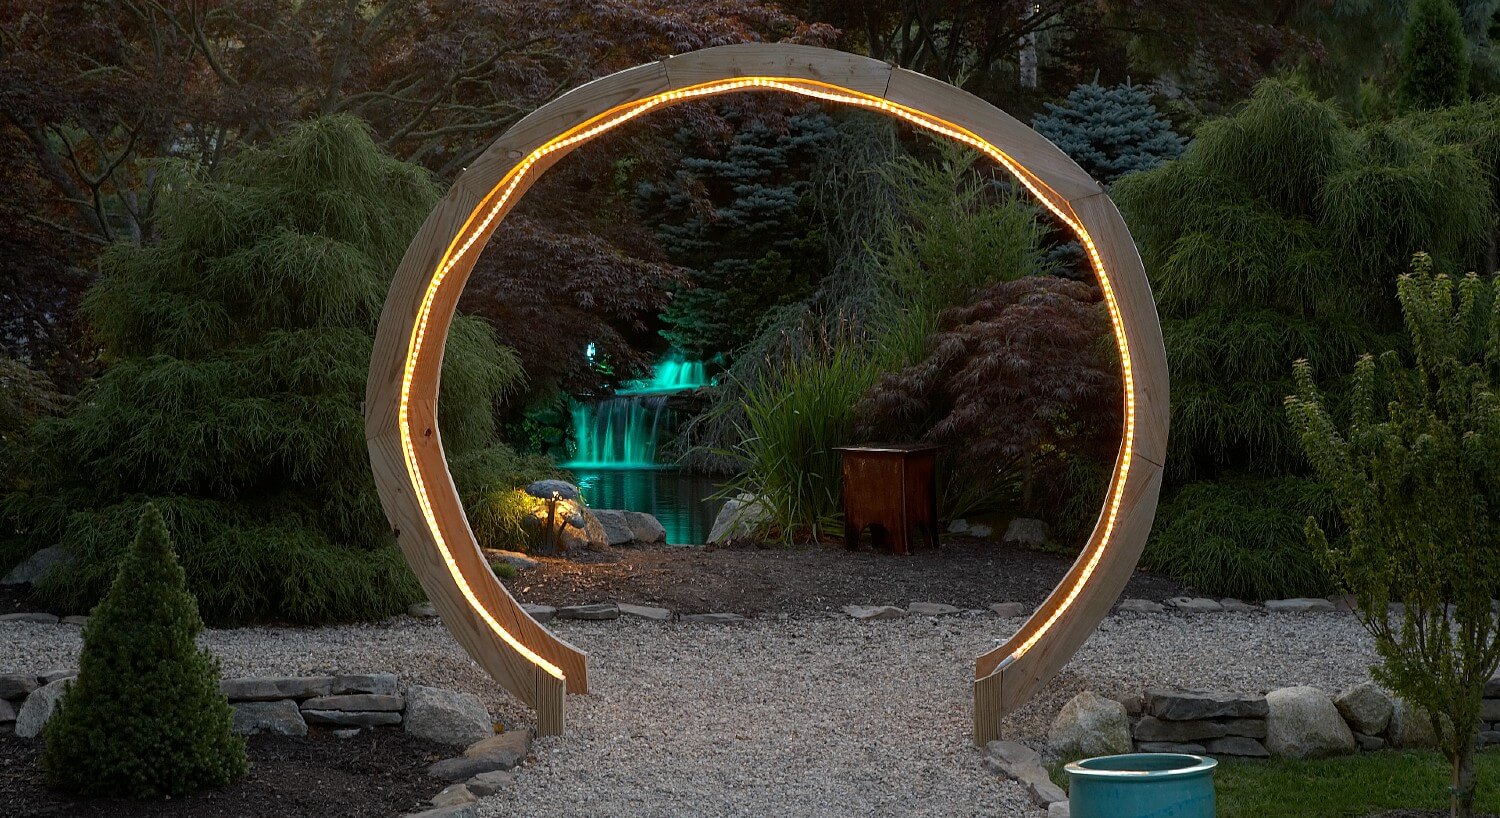 Large circular wooden gate with rope lights lit up at night with colorful green fountain in the background